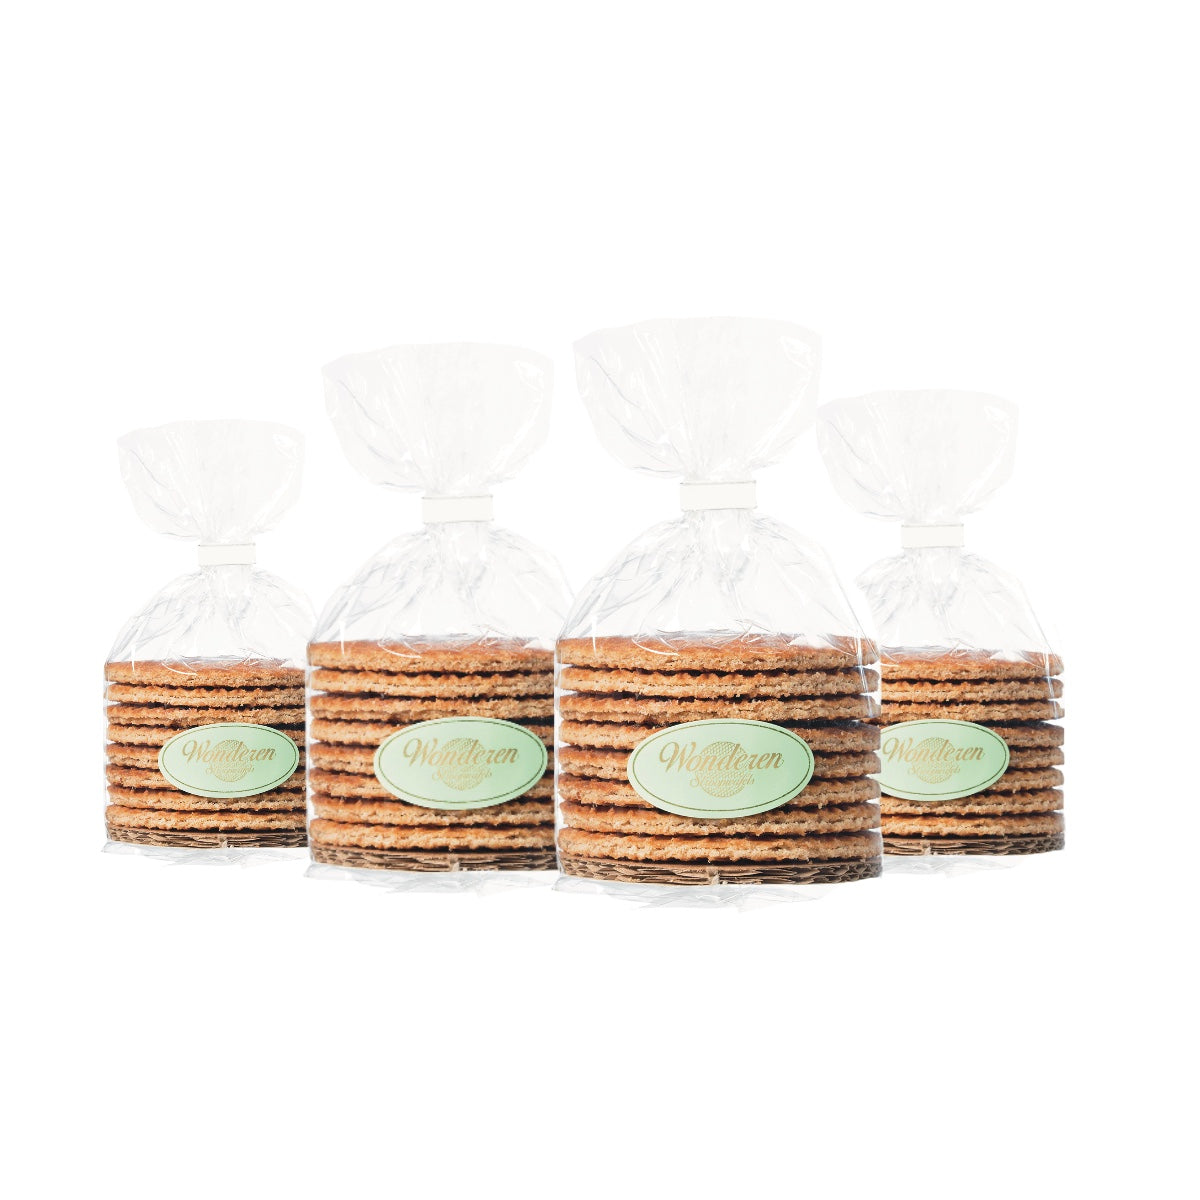 Four Wonderen Stroopwafels in plastic bags on a white background.